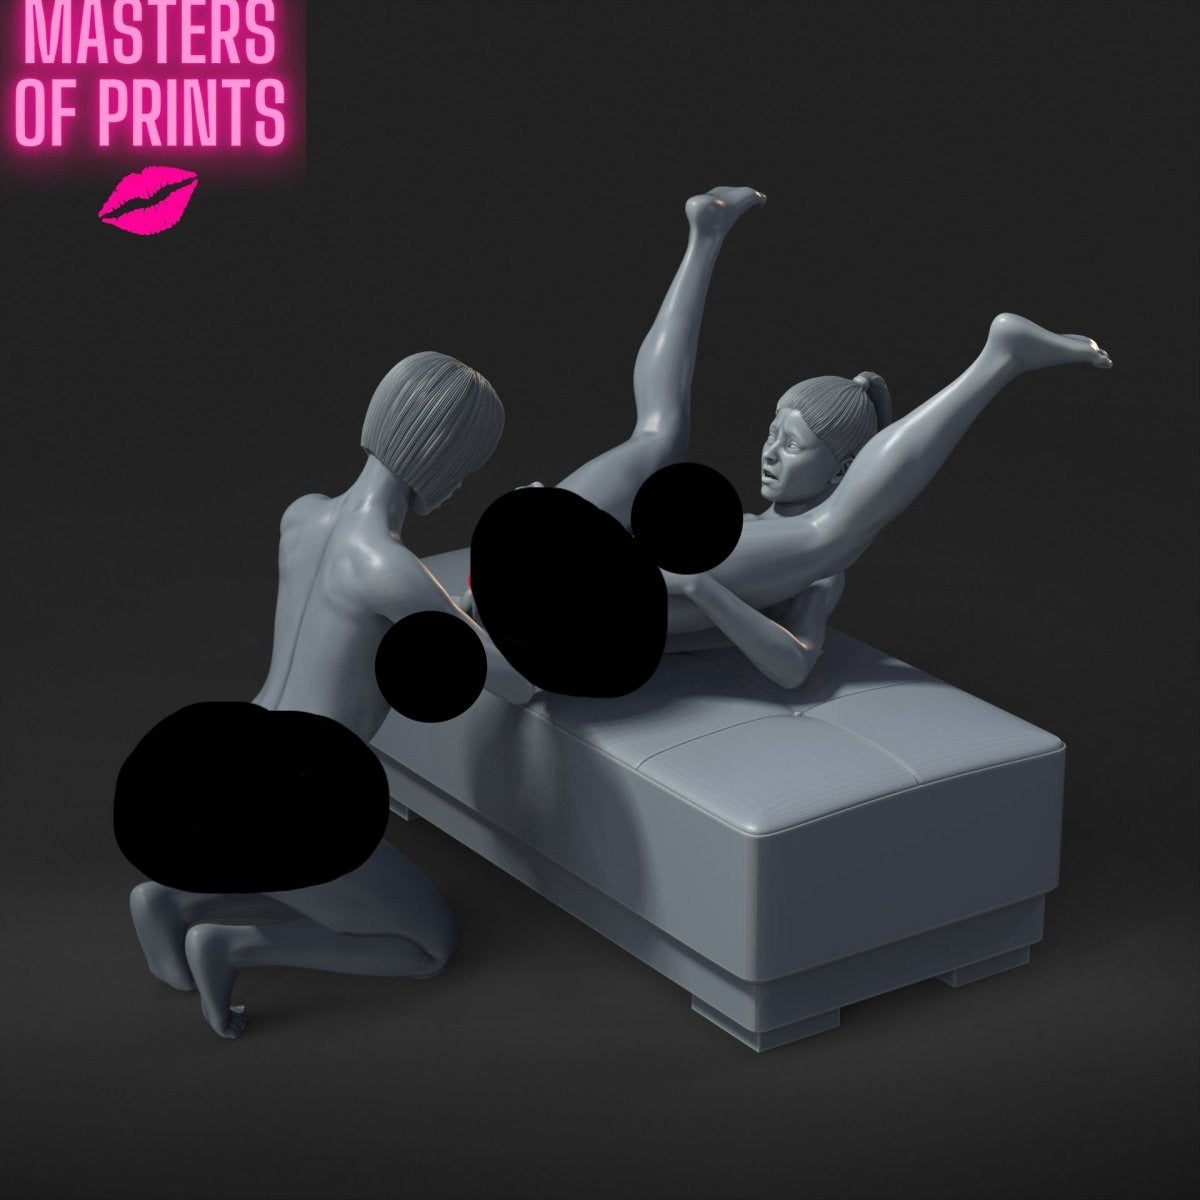 Lesbians 313 Mature 3d Printed miniature FanArt by Masters Of Prints Collectables Statues & Figurines